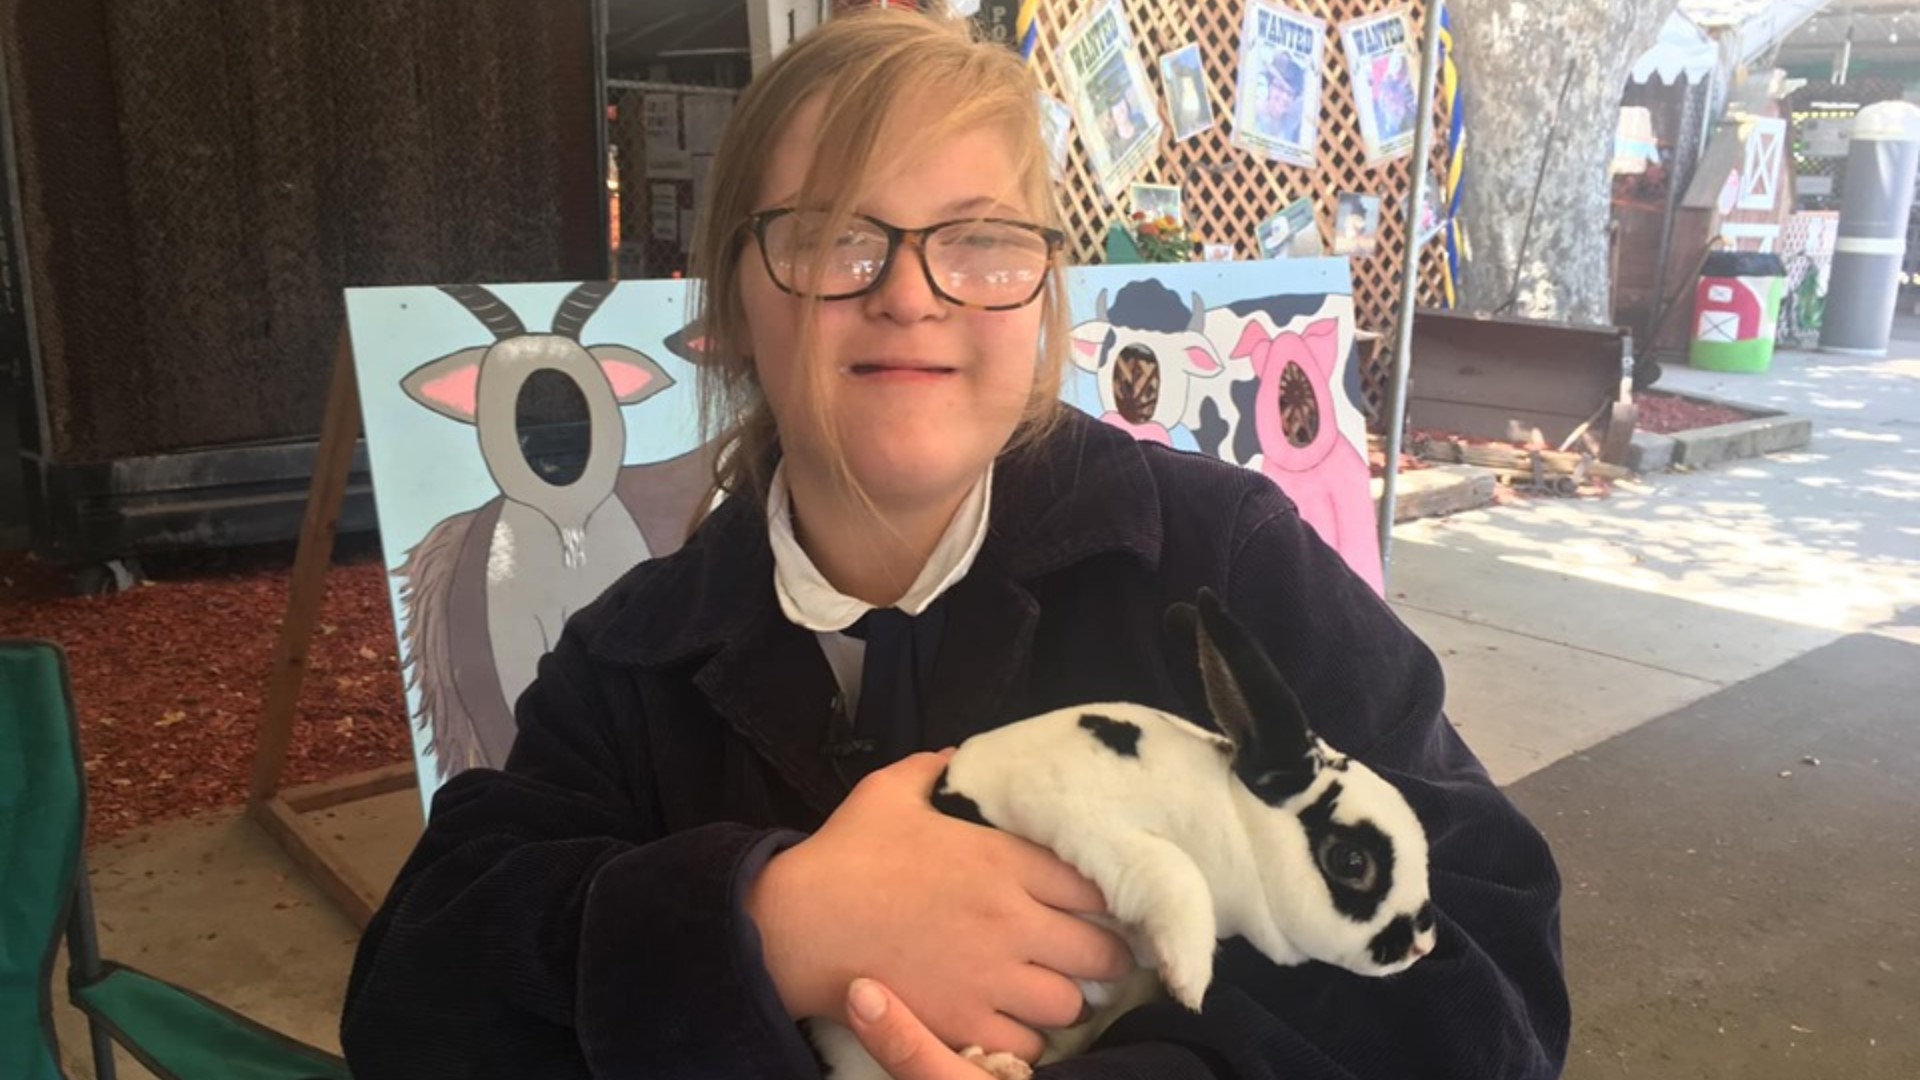 Abbie Milligan is a teenager living with Down Syndrome who has been competing – and winning – in FFA and 4H competitions since the age of 5.